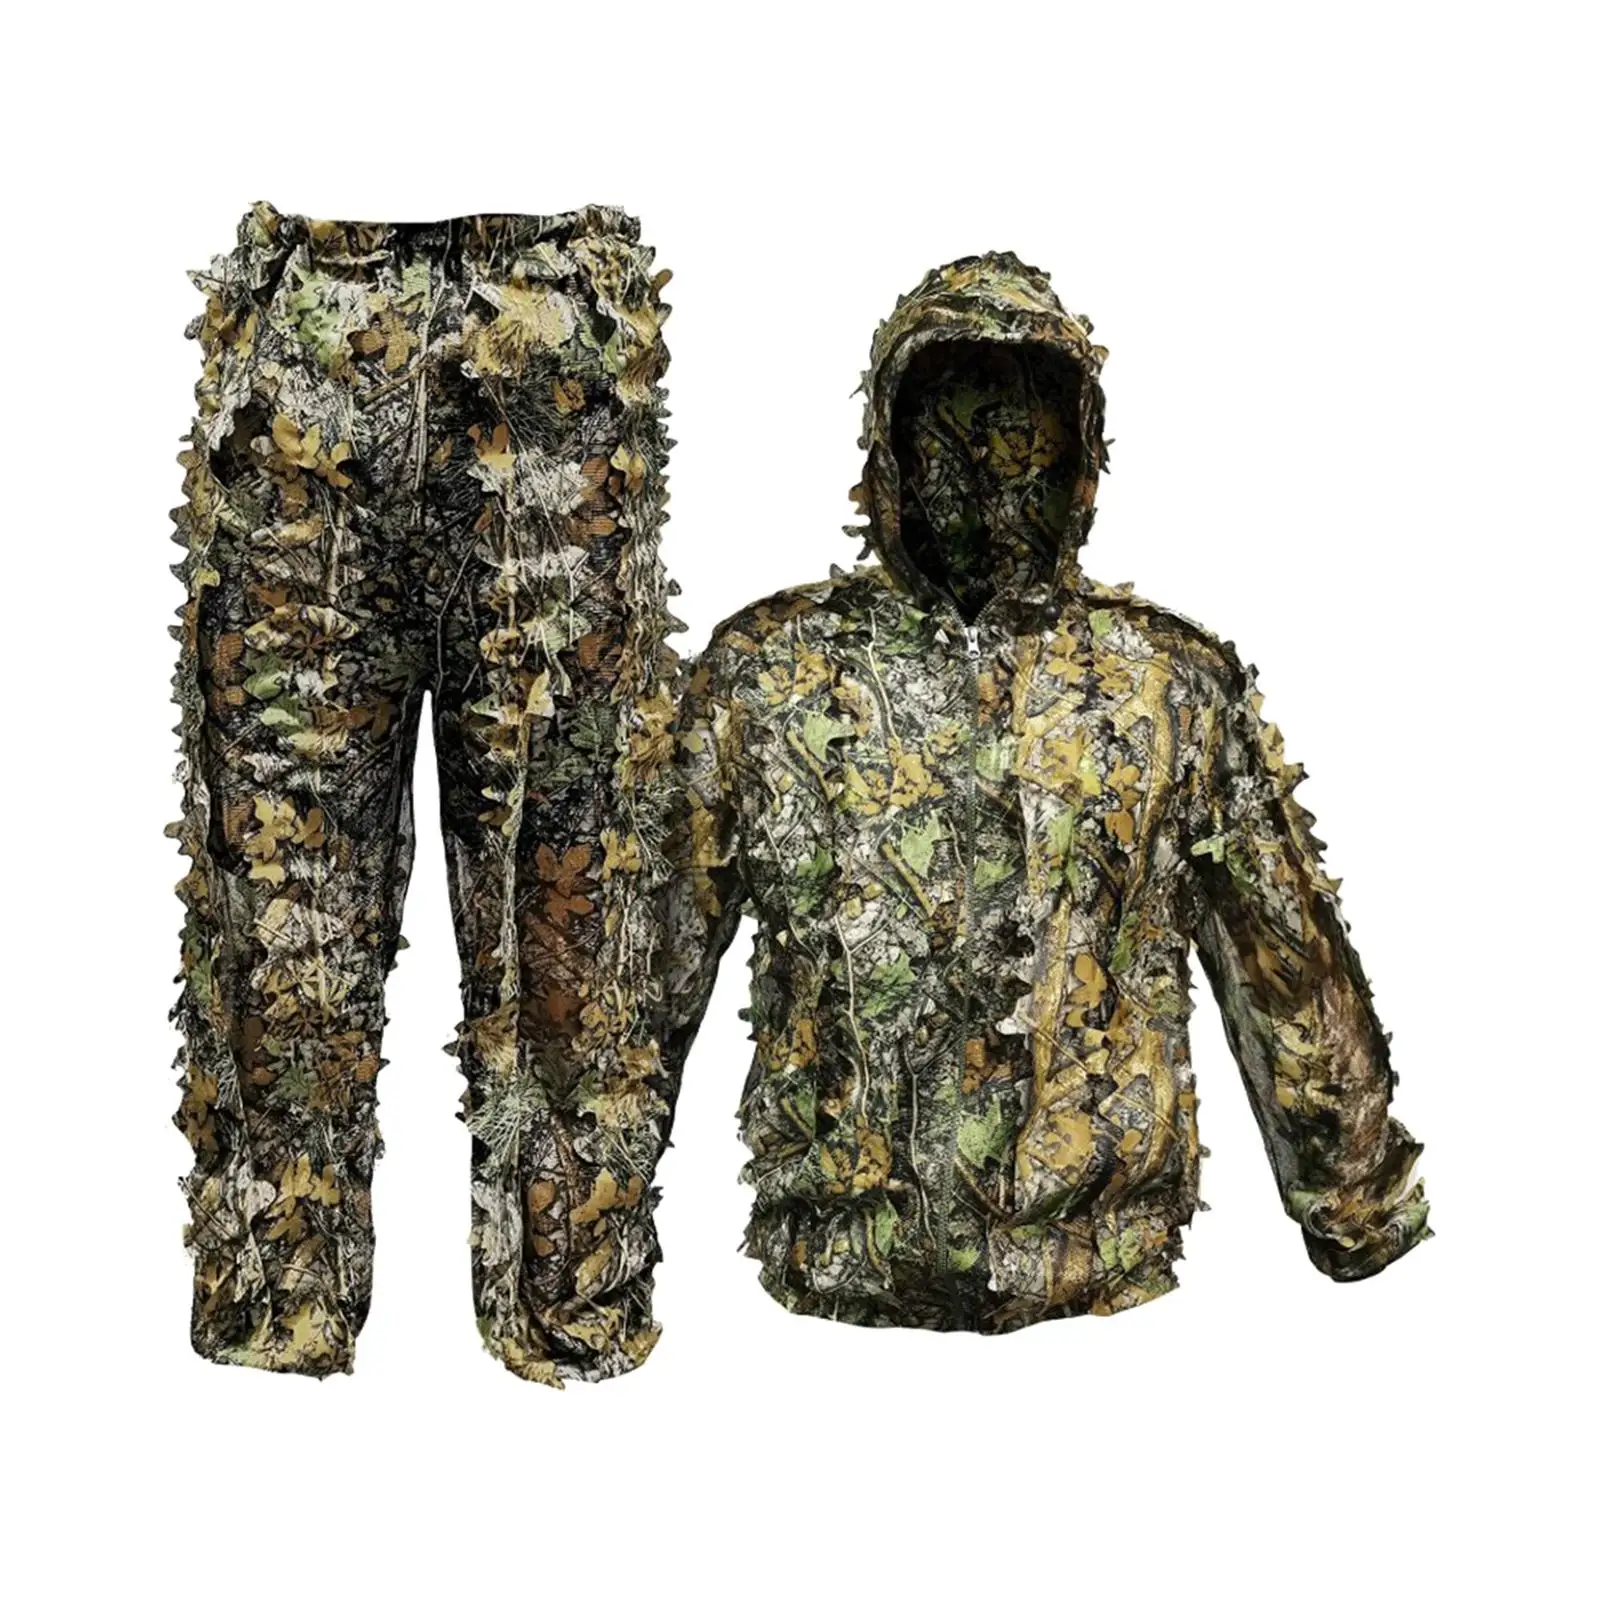 Leaves Ghillie Suit Woodland Jacket Pant Clothing Leafy Clothes Forest Zippers for Camping Unisex Photography Jungle